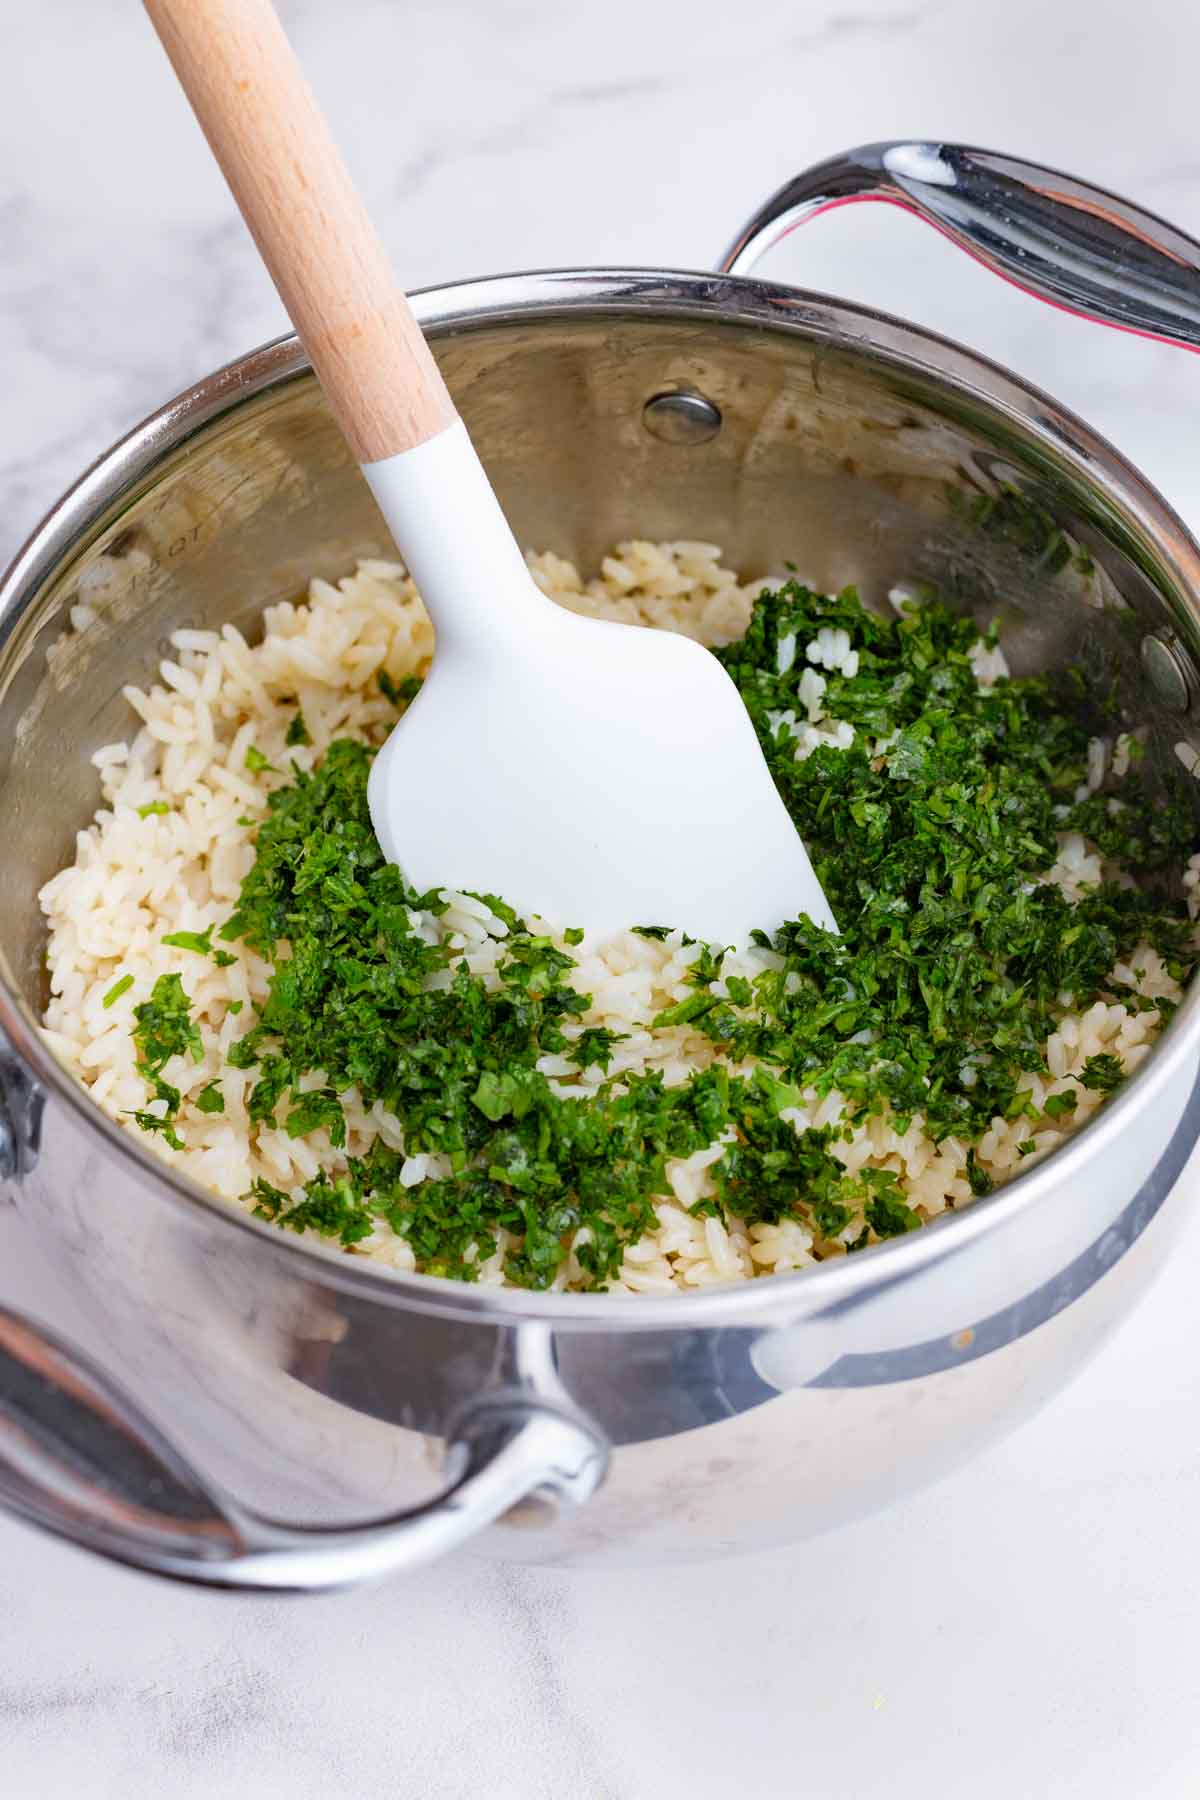 Cilantro lime rice is made in a pot on the stove.